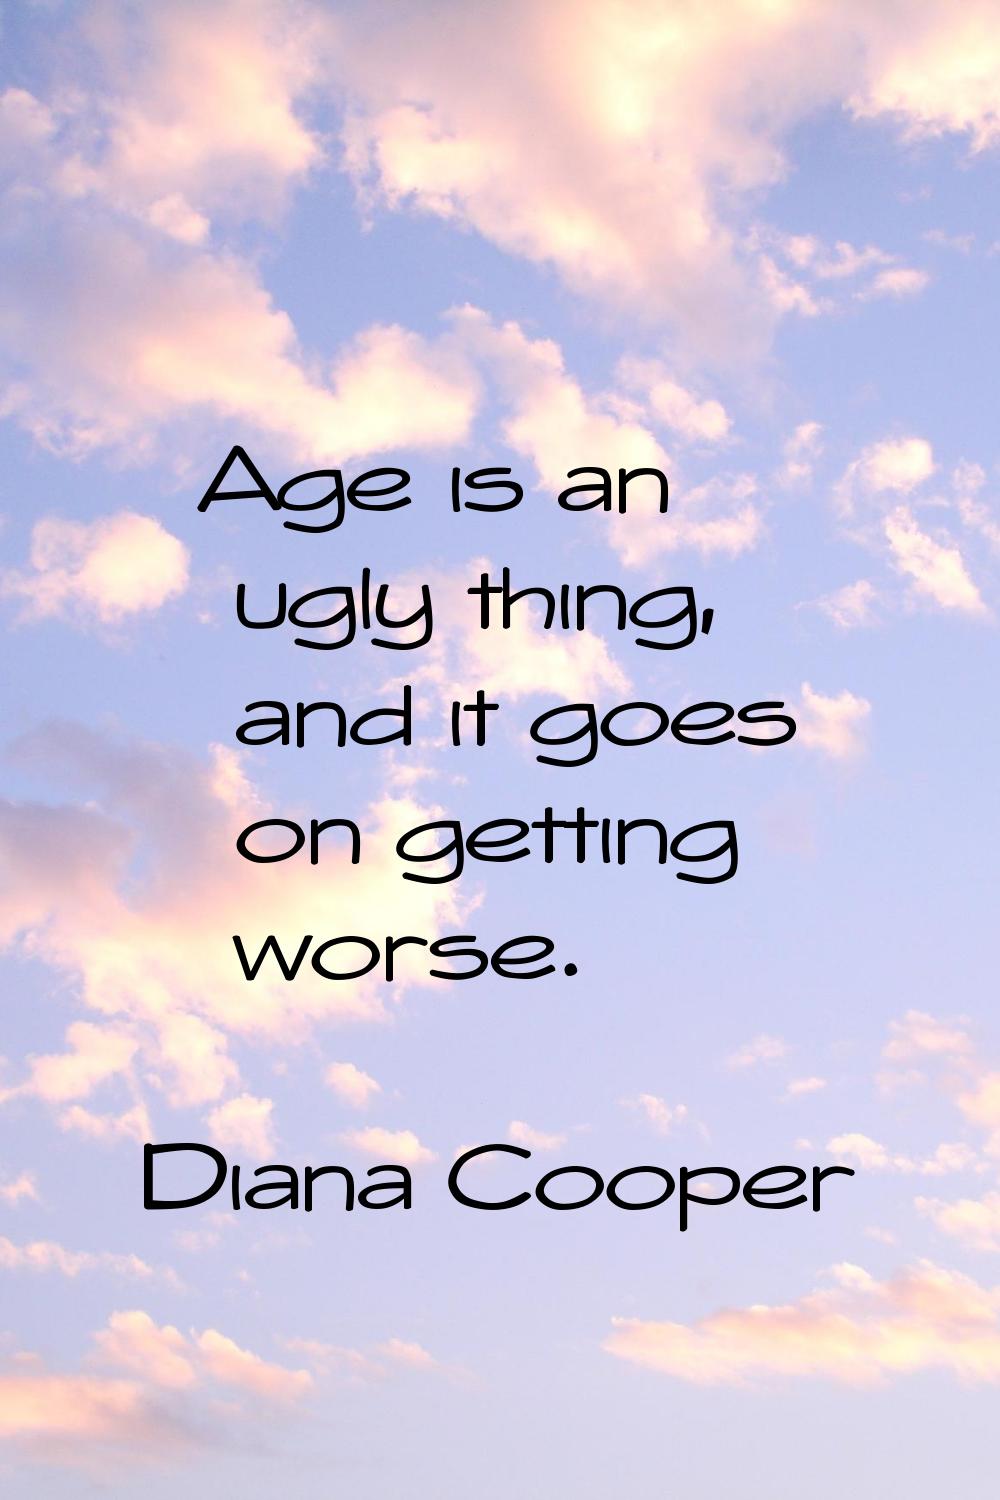 Age is an ugly thing, and it goes on getting worse.